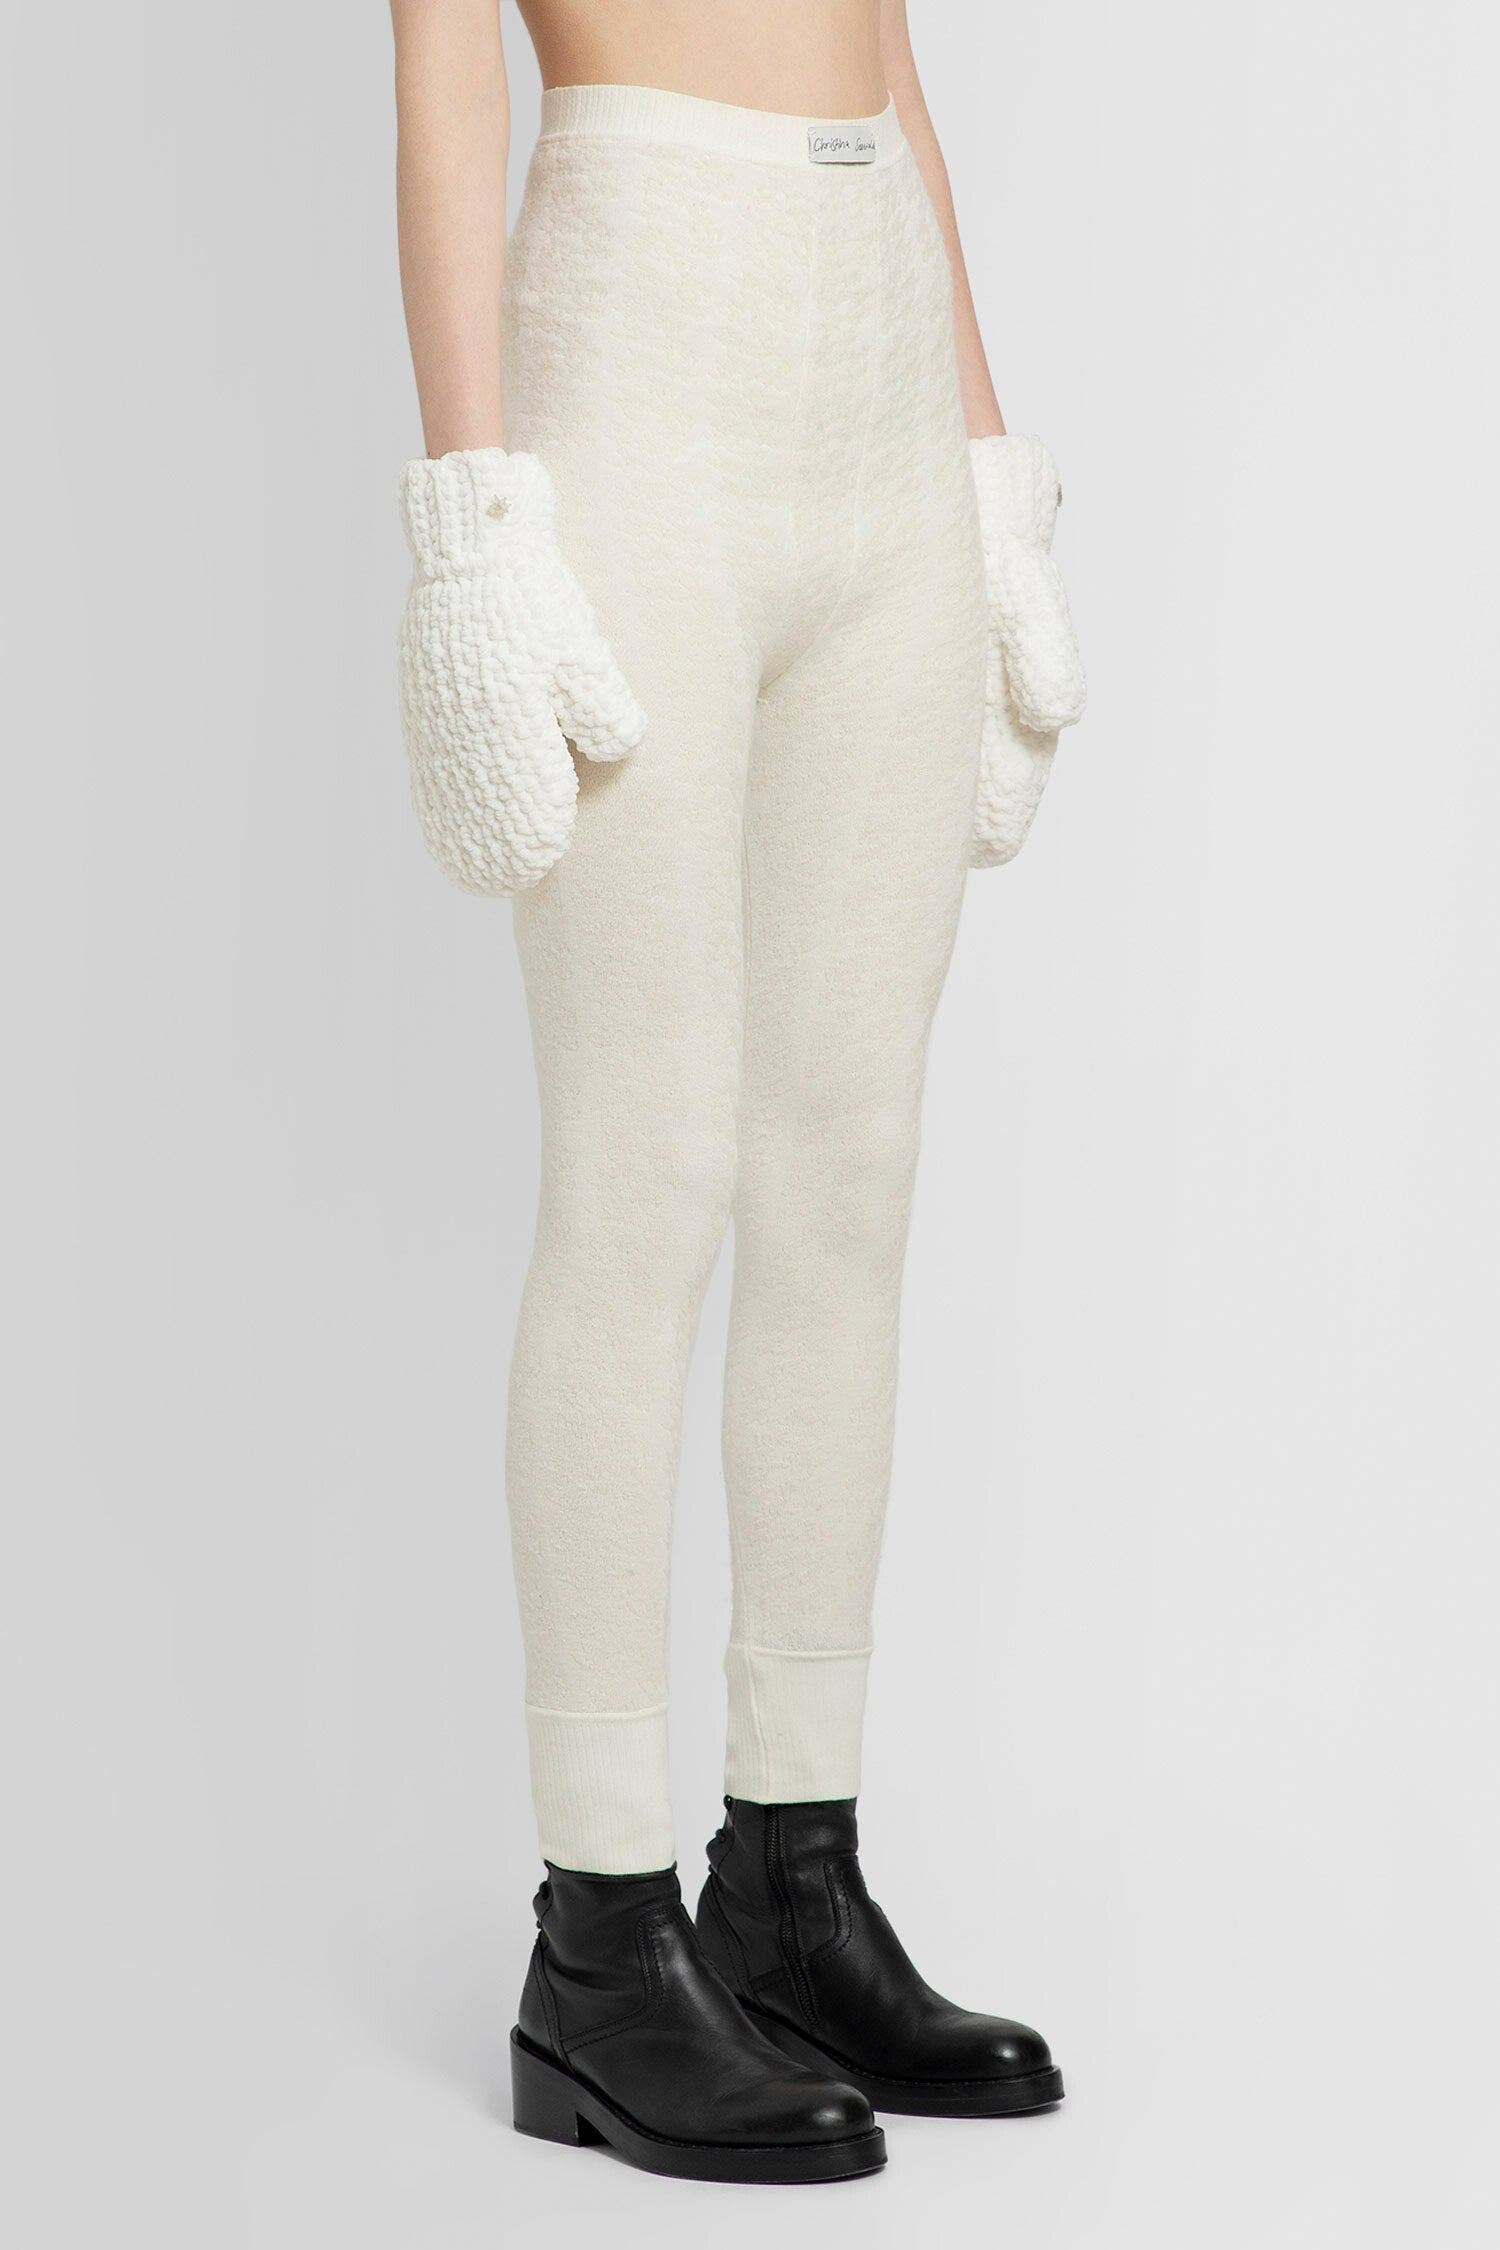 CHRISTINA SEEWALD WOMAN OFF-WHITE TROUSERS